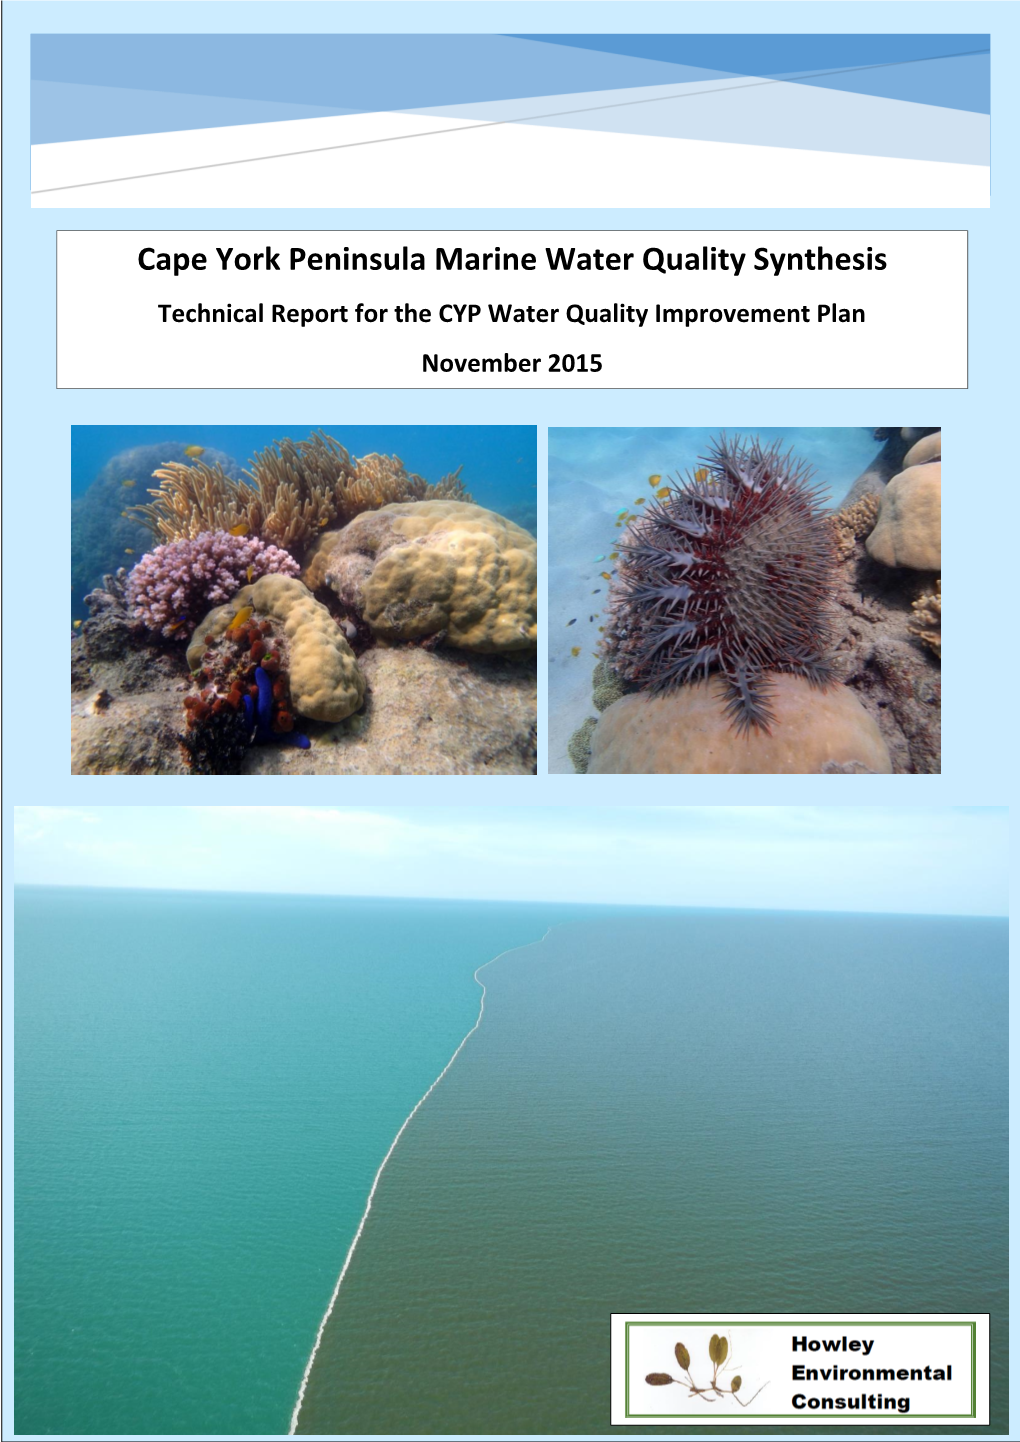 Cape York Peninsula Marine Water Quality Synthesis